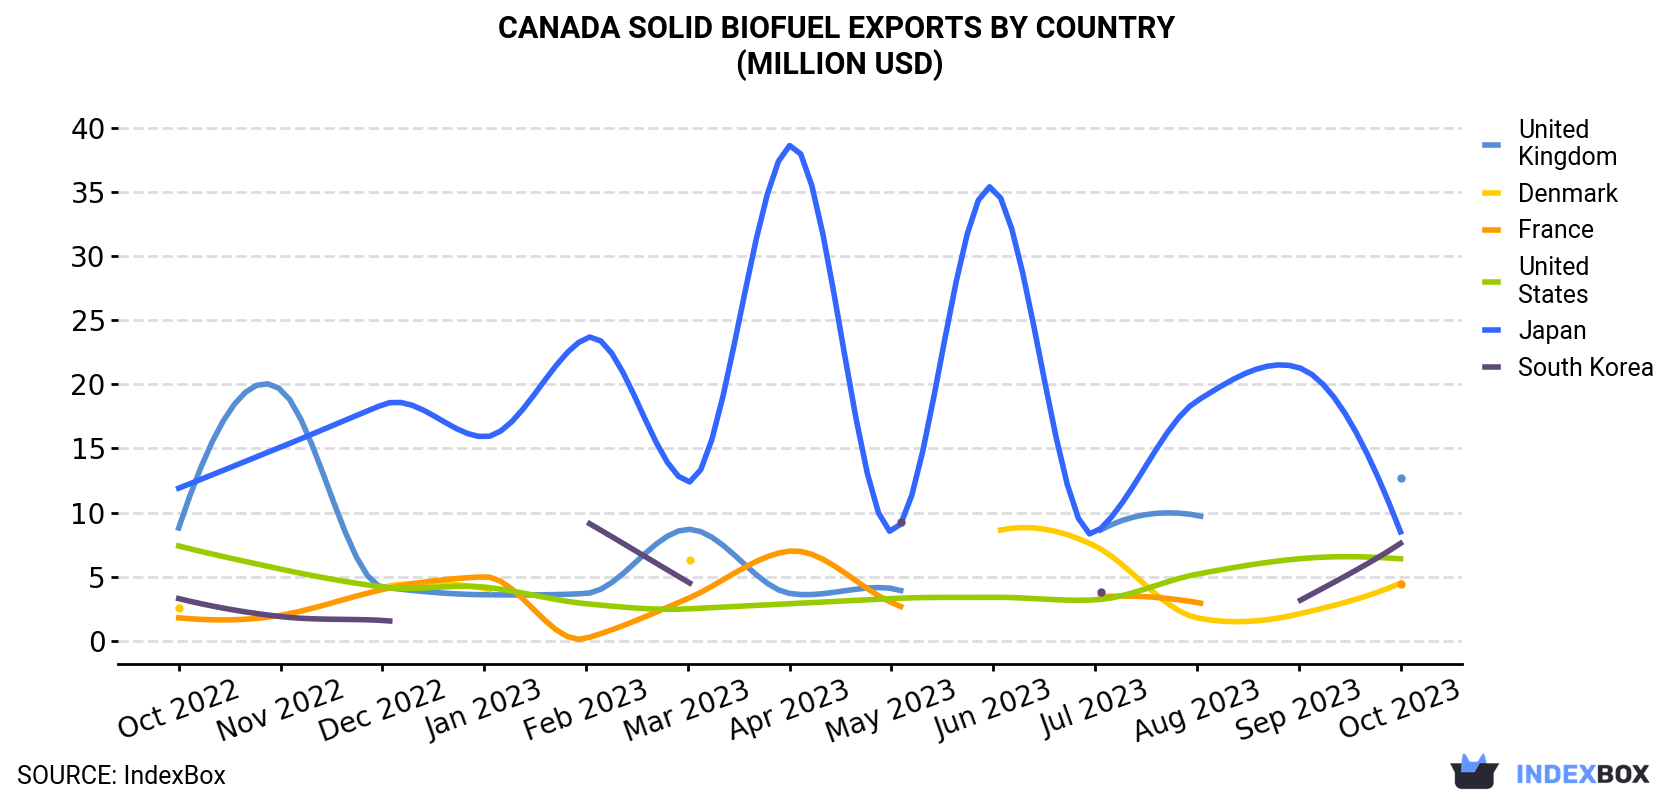 Canada Solid Biofuel Exports By Country (Million USD)